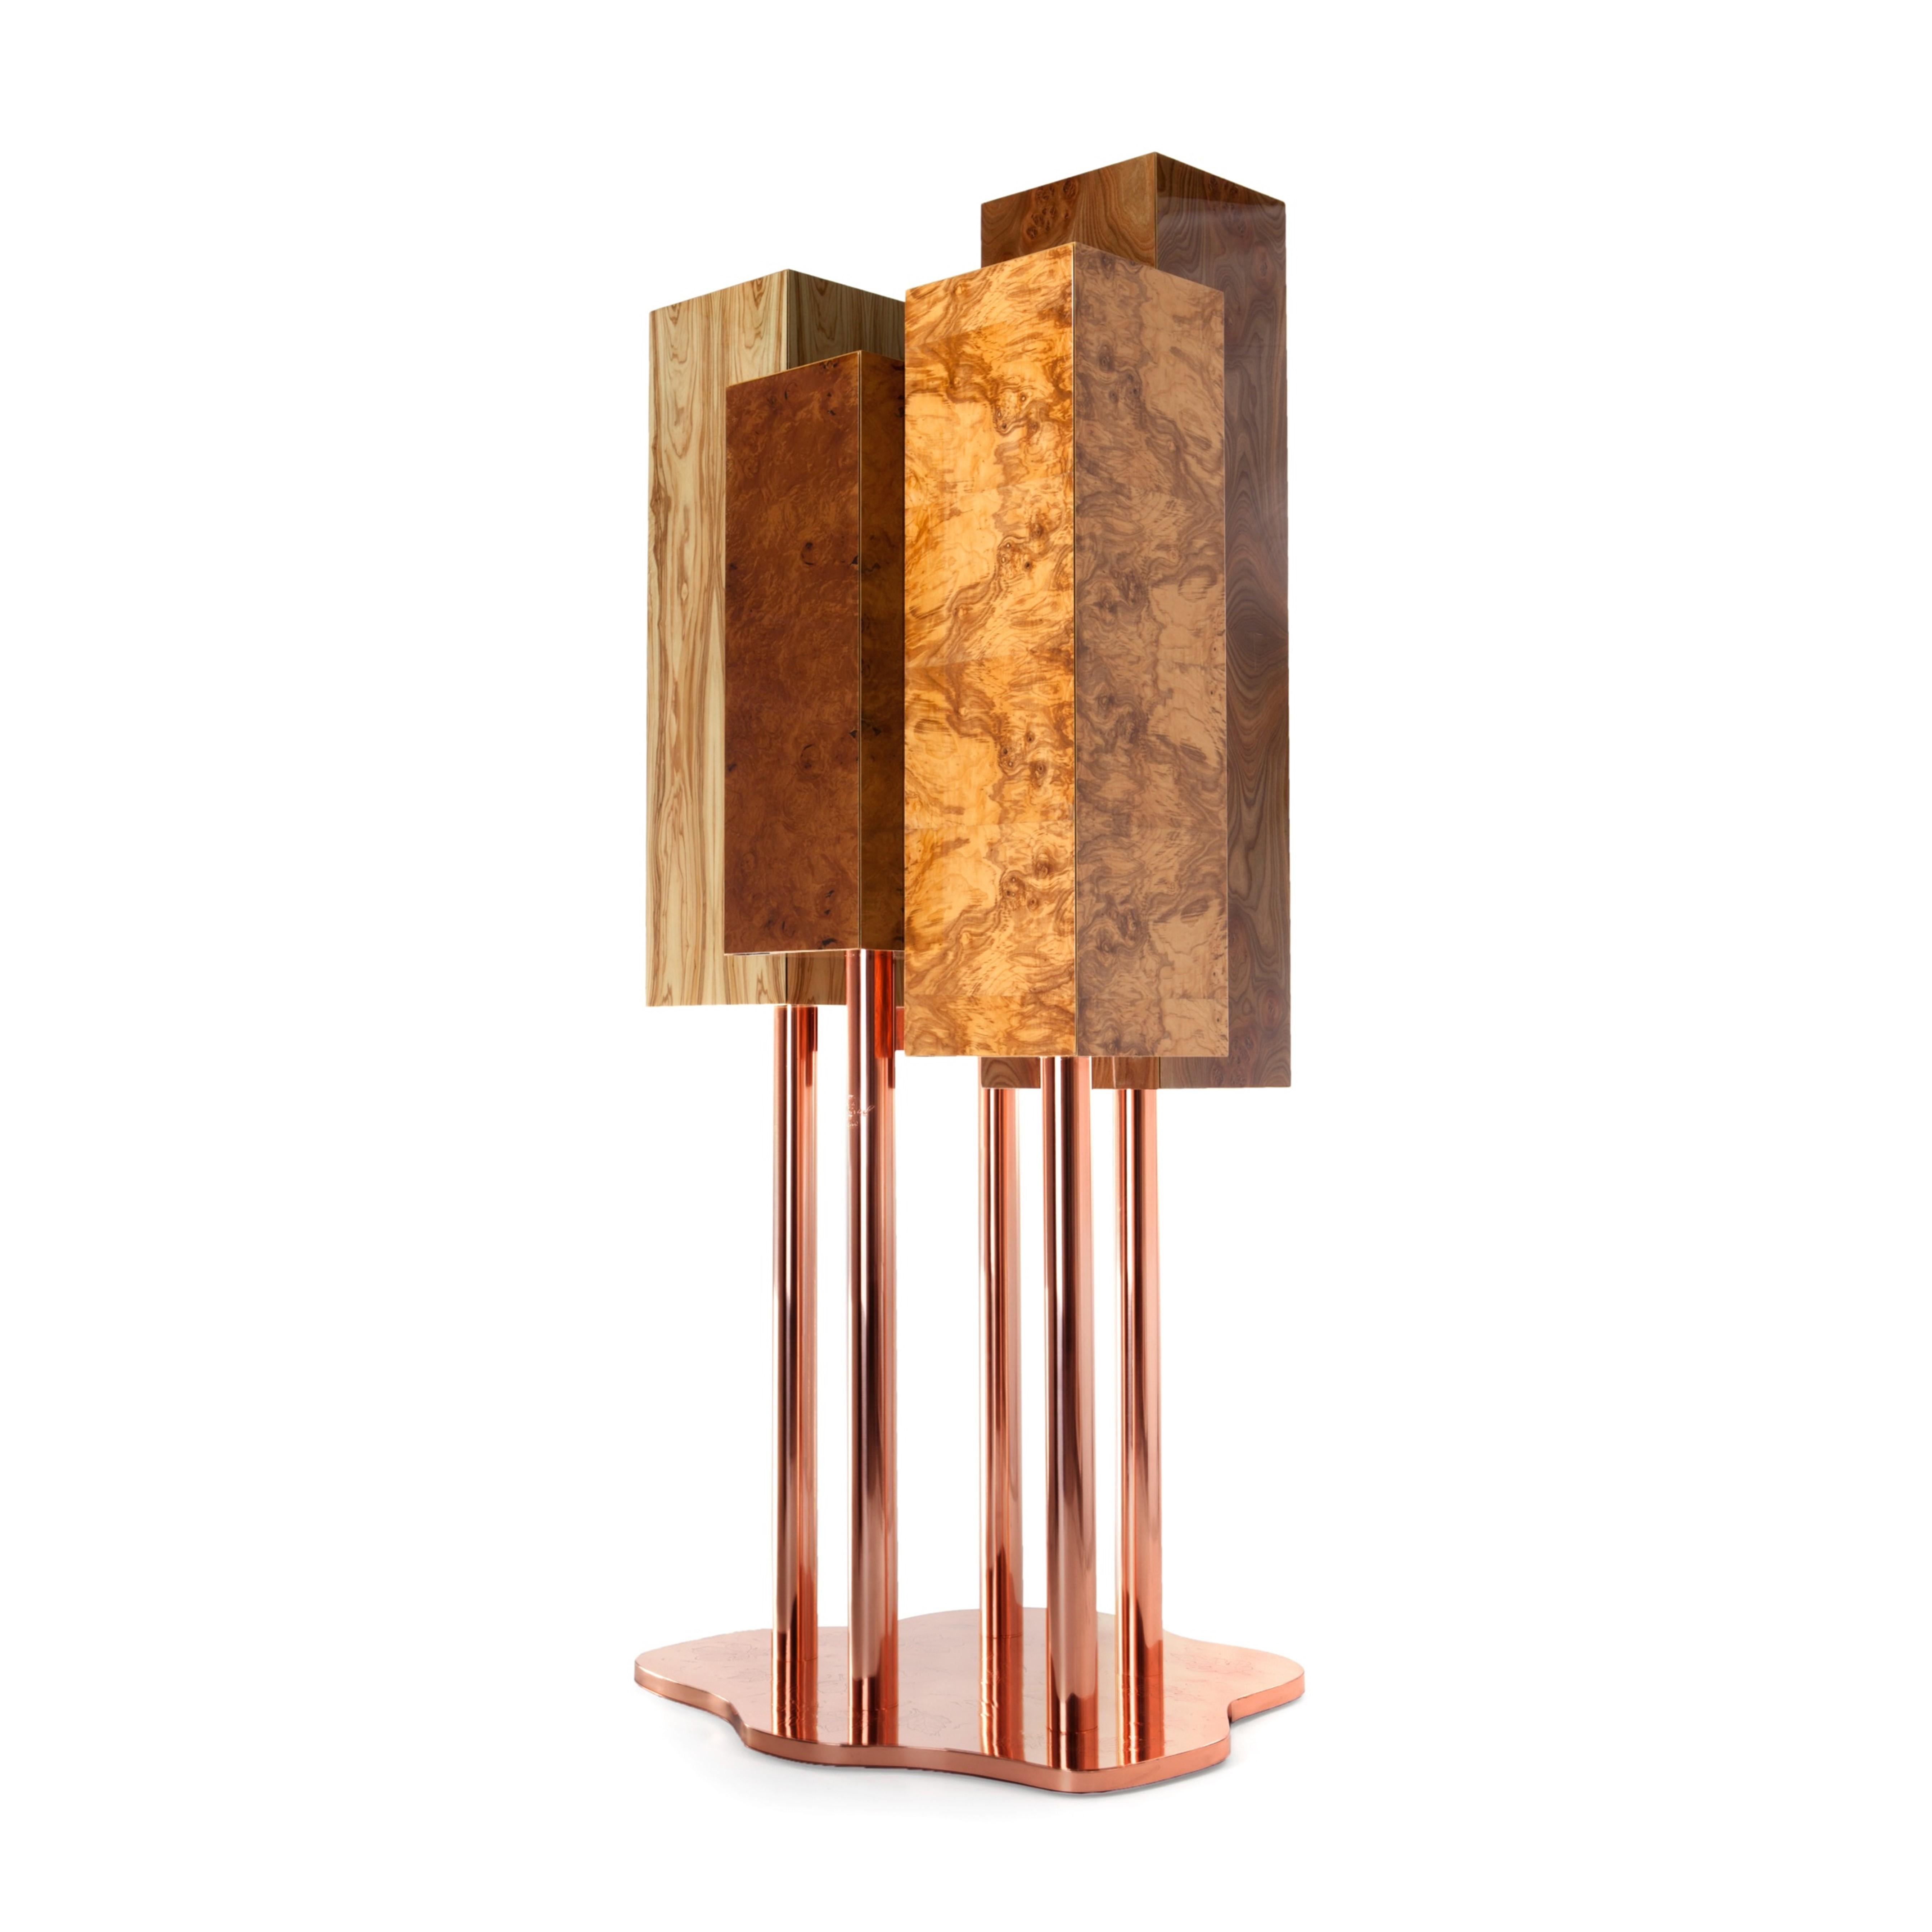 Portuguese Special Tree Cabinet, Woods and Copper, InsidherLand by Joana Santos Barbosa For Sale